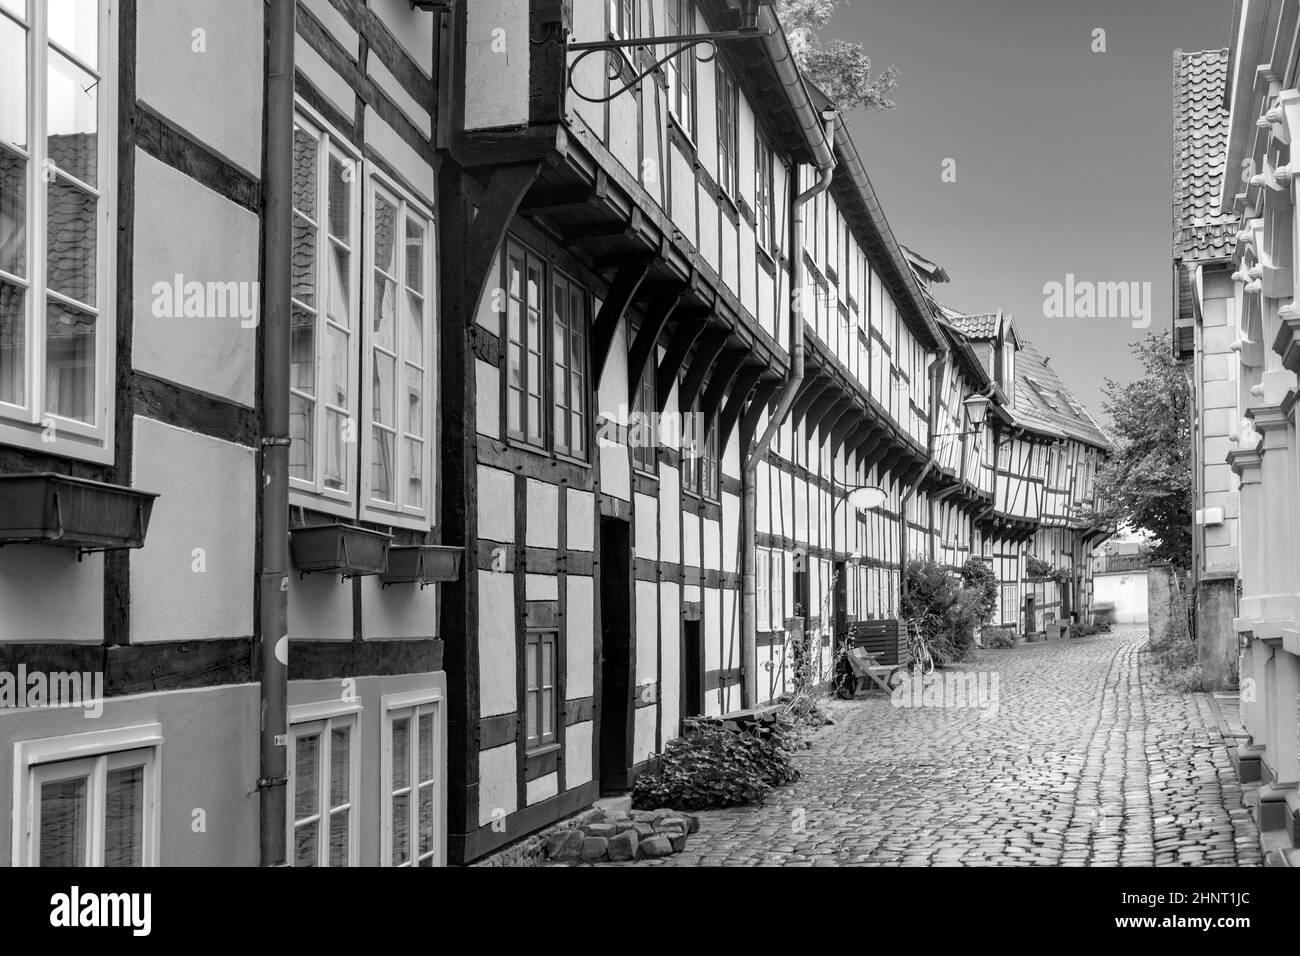 scenic old half timbered houses in the town of Detmold at Adolfs street  in Germany Stock Photo